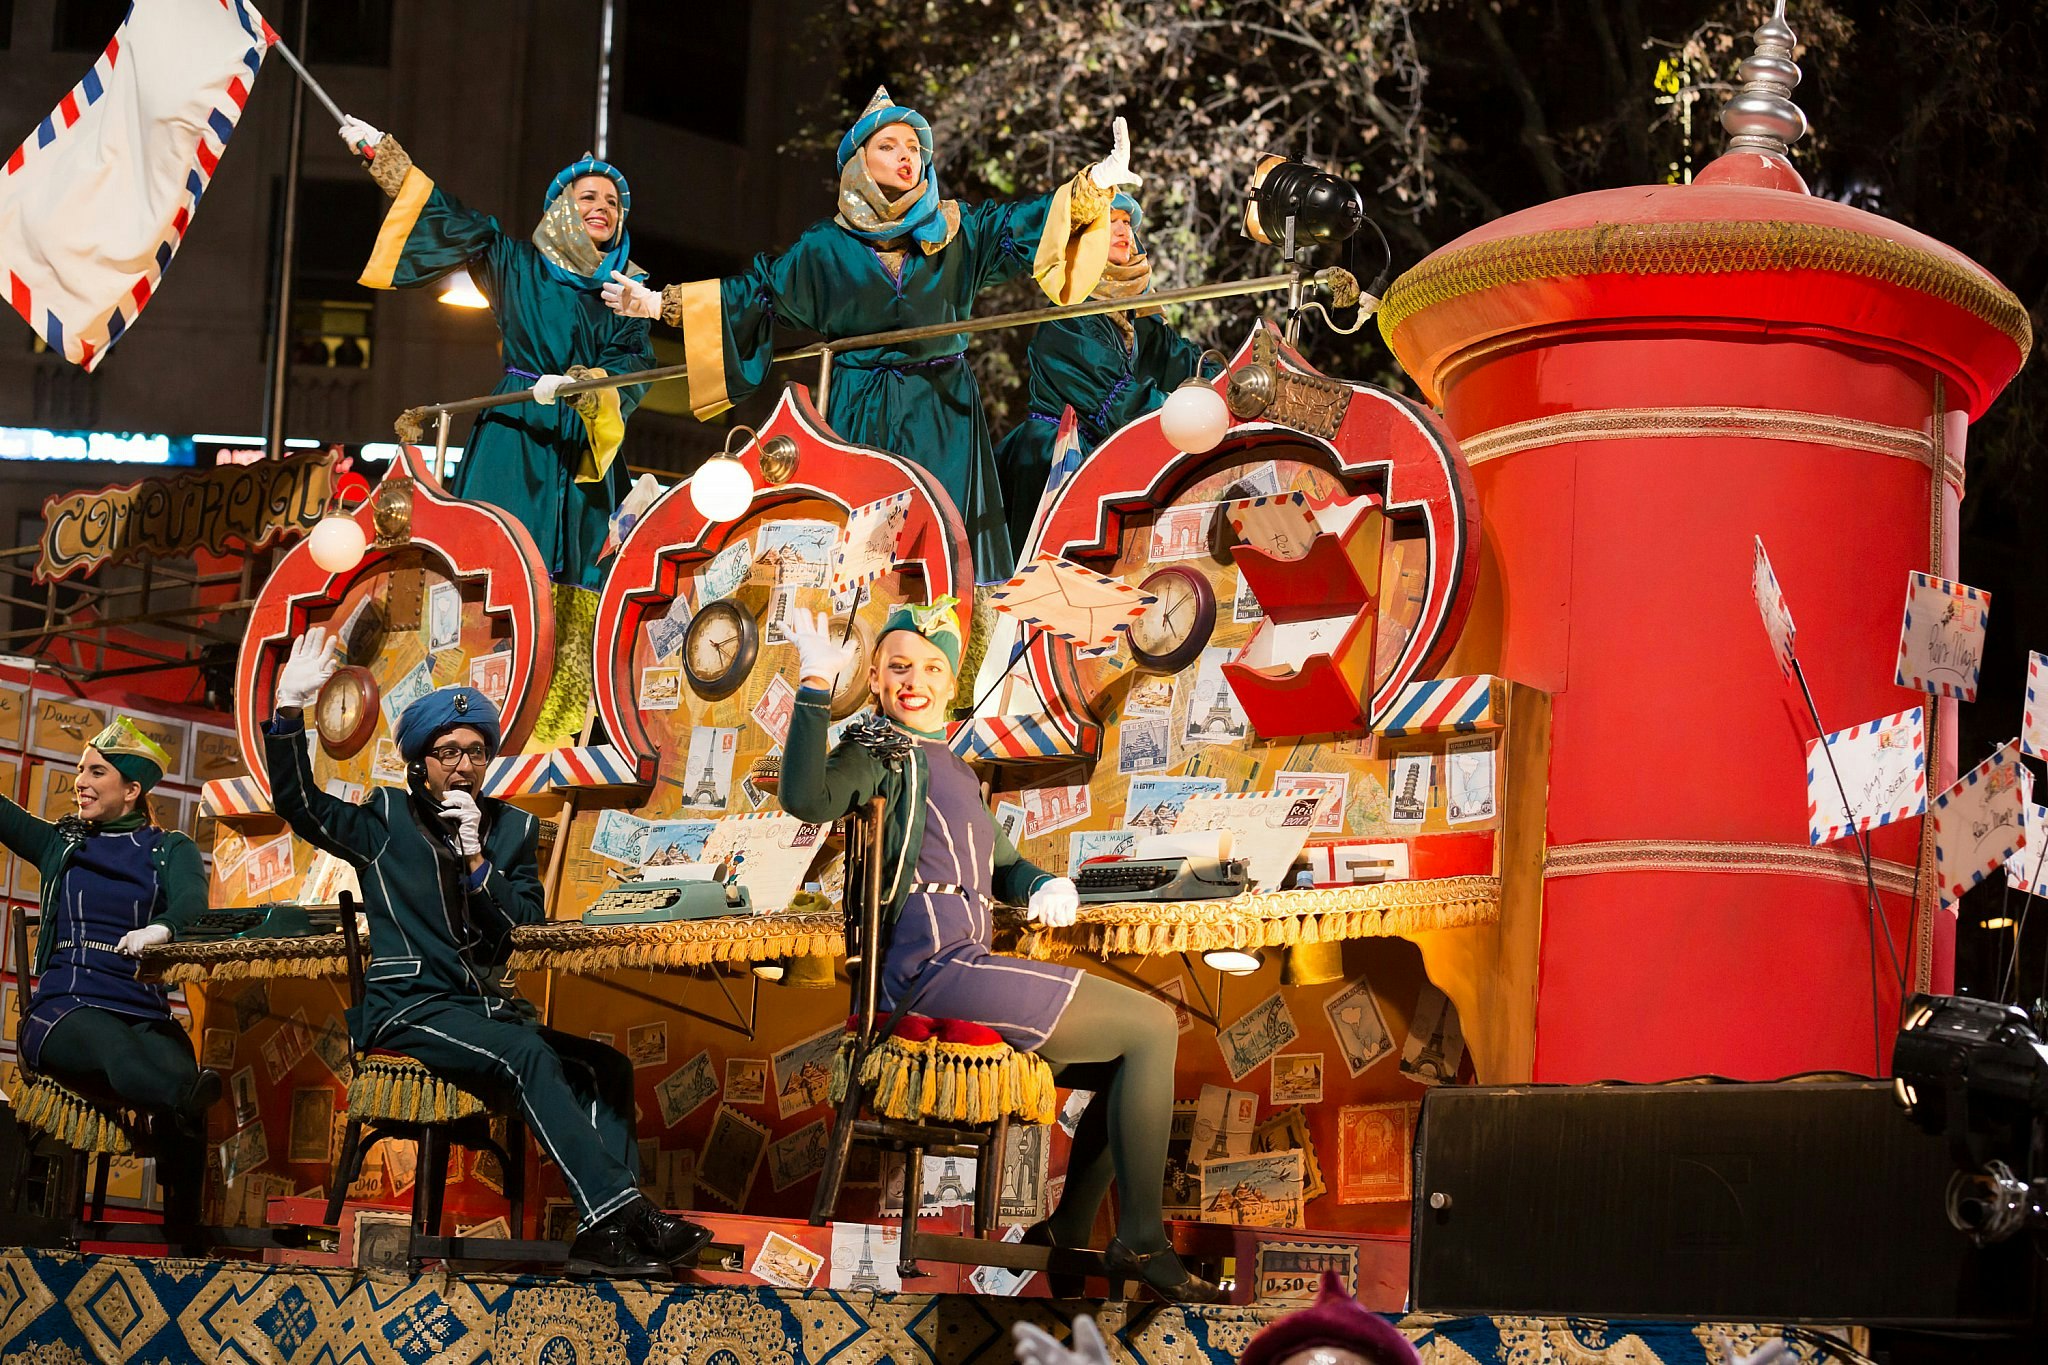 The Kings' Day parade in Barcelona: people are on a float dressed in blue outfits, sitting at desks with vintage typewriters and airmail letters.